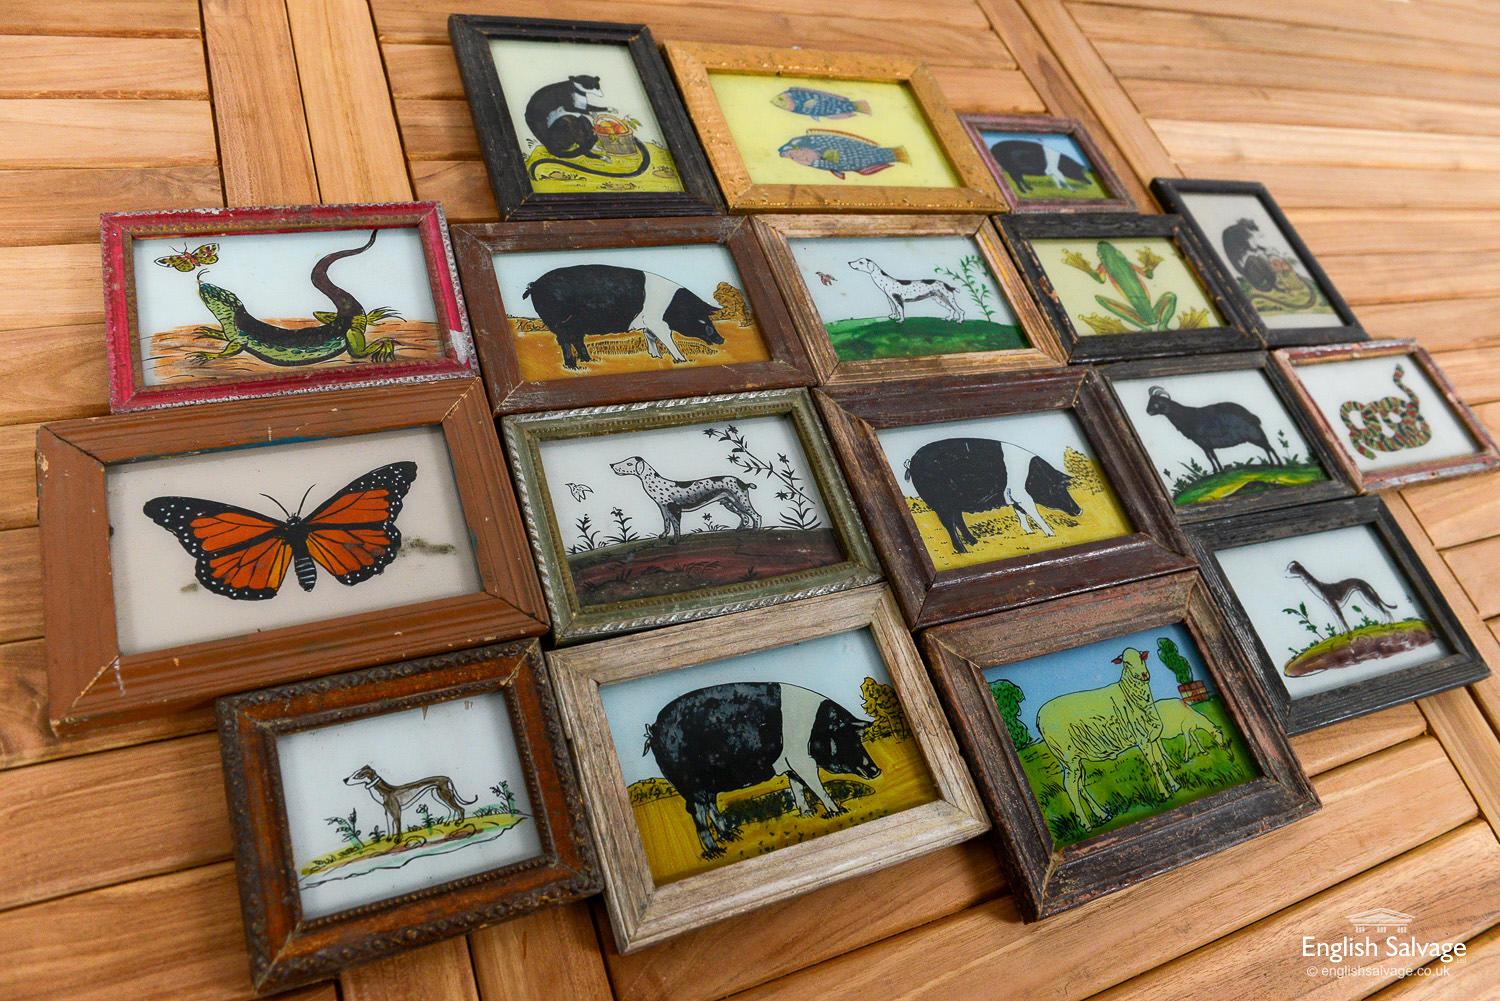 These Folk Art style pictures of animals are painted directly onto the glass and framed in reclaimed wood. The measurements provided below are approximate as each frame is a slightly different size. Age-related wear, scrapes and flaking paint to the